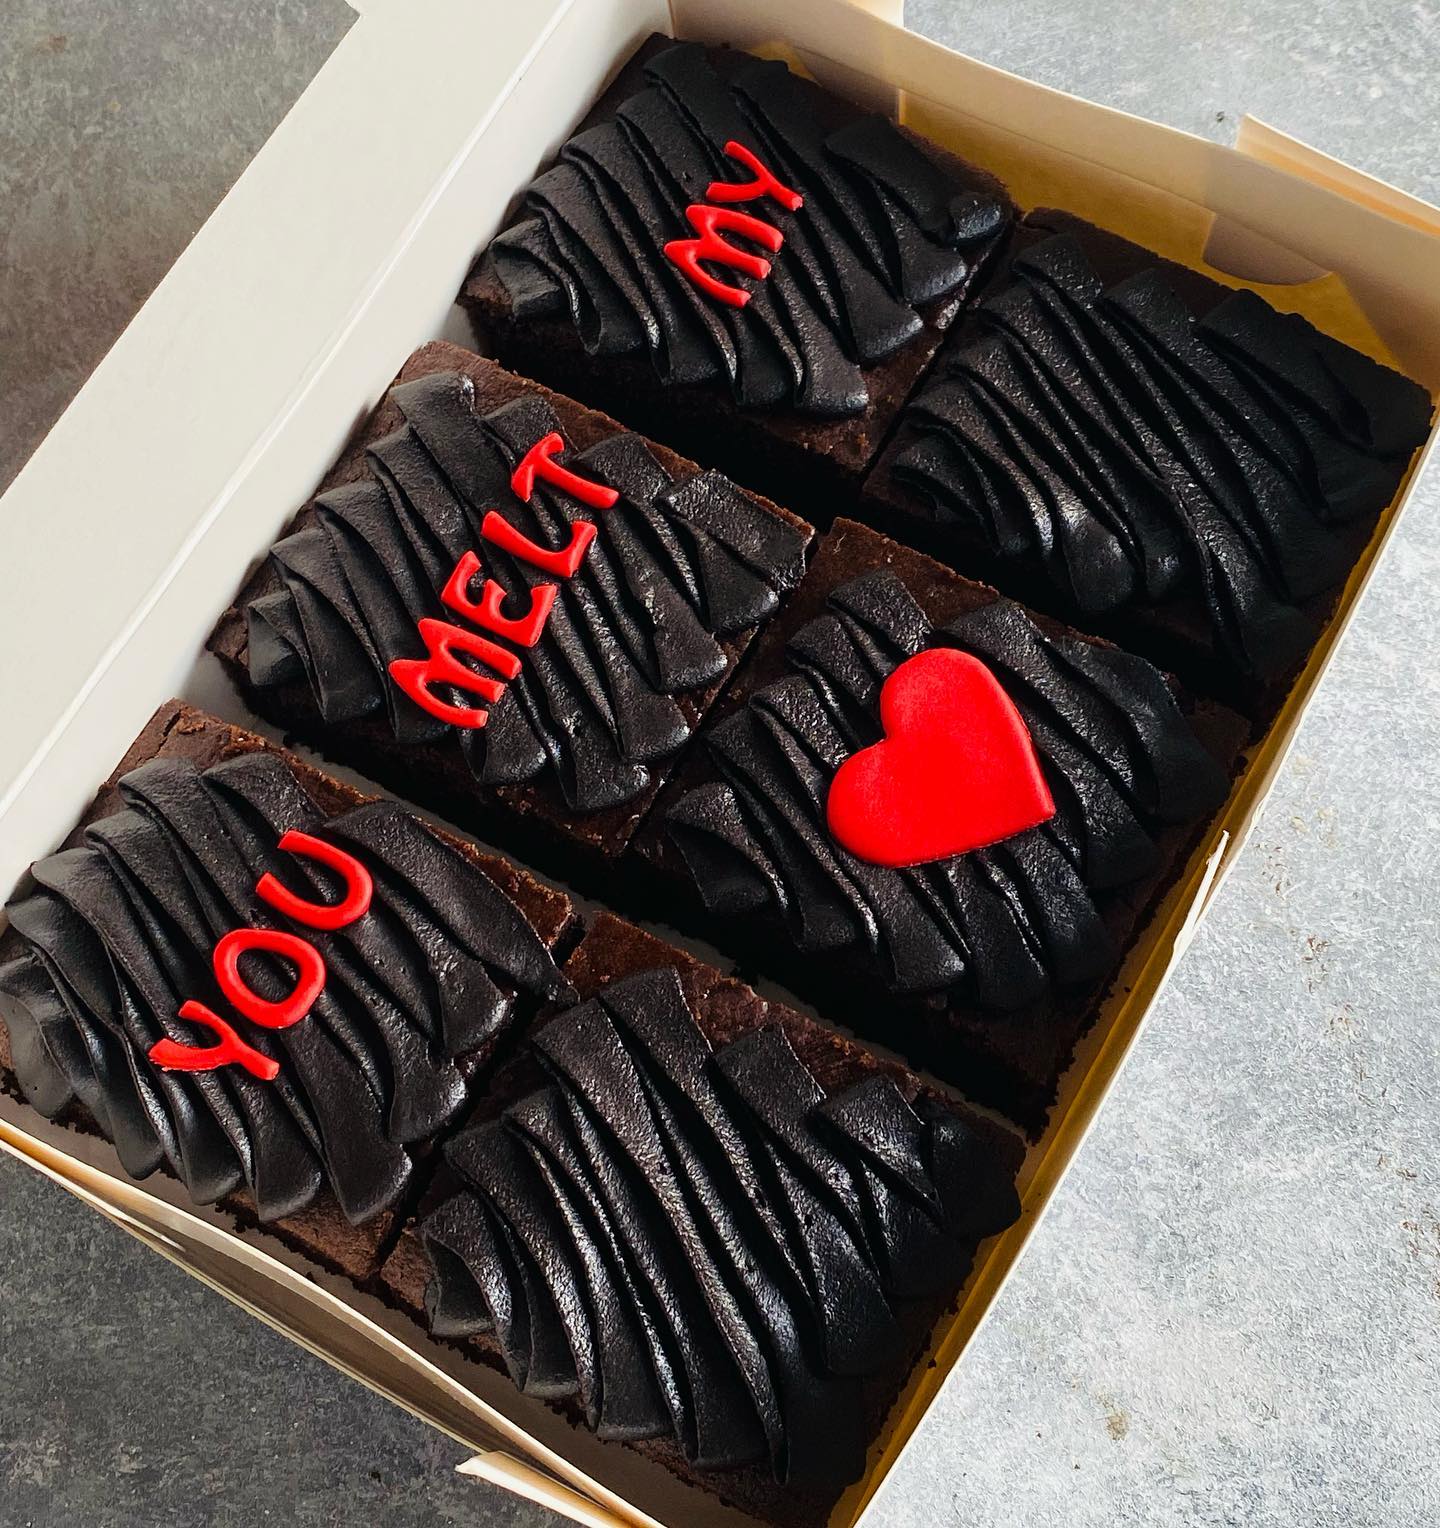 Our limited edition Valentine’s special chocolate brownies ❤️

Available only on prior orders, Call or WhatsApp us on 9620902494 for orders and delivery options📲 

#brownies #chocolate #chocolatebrownie #love #loveisintheair #valentines #valentinesdaygift #valentinesday #love #bangalorediaries #youmeltmyheart #ordernow #trending #heart #gifting #celebration #red #bangalore